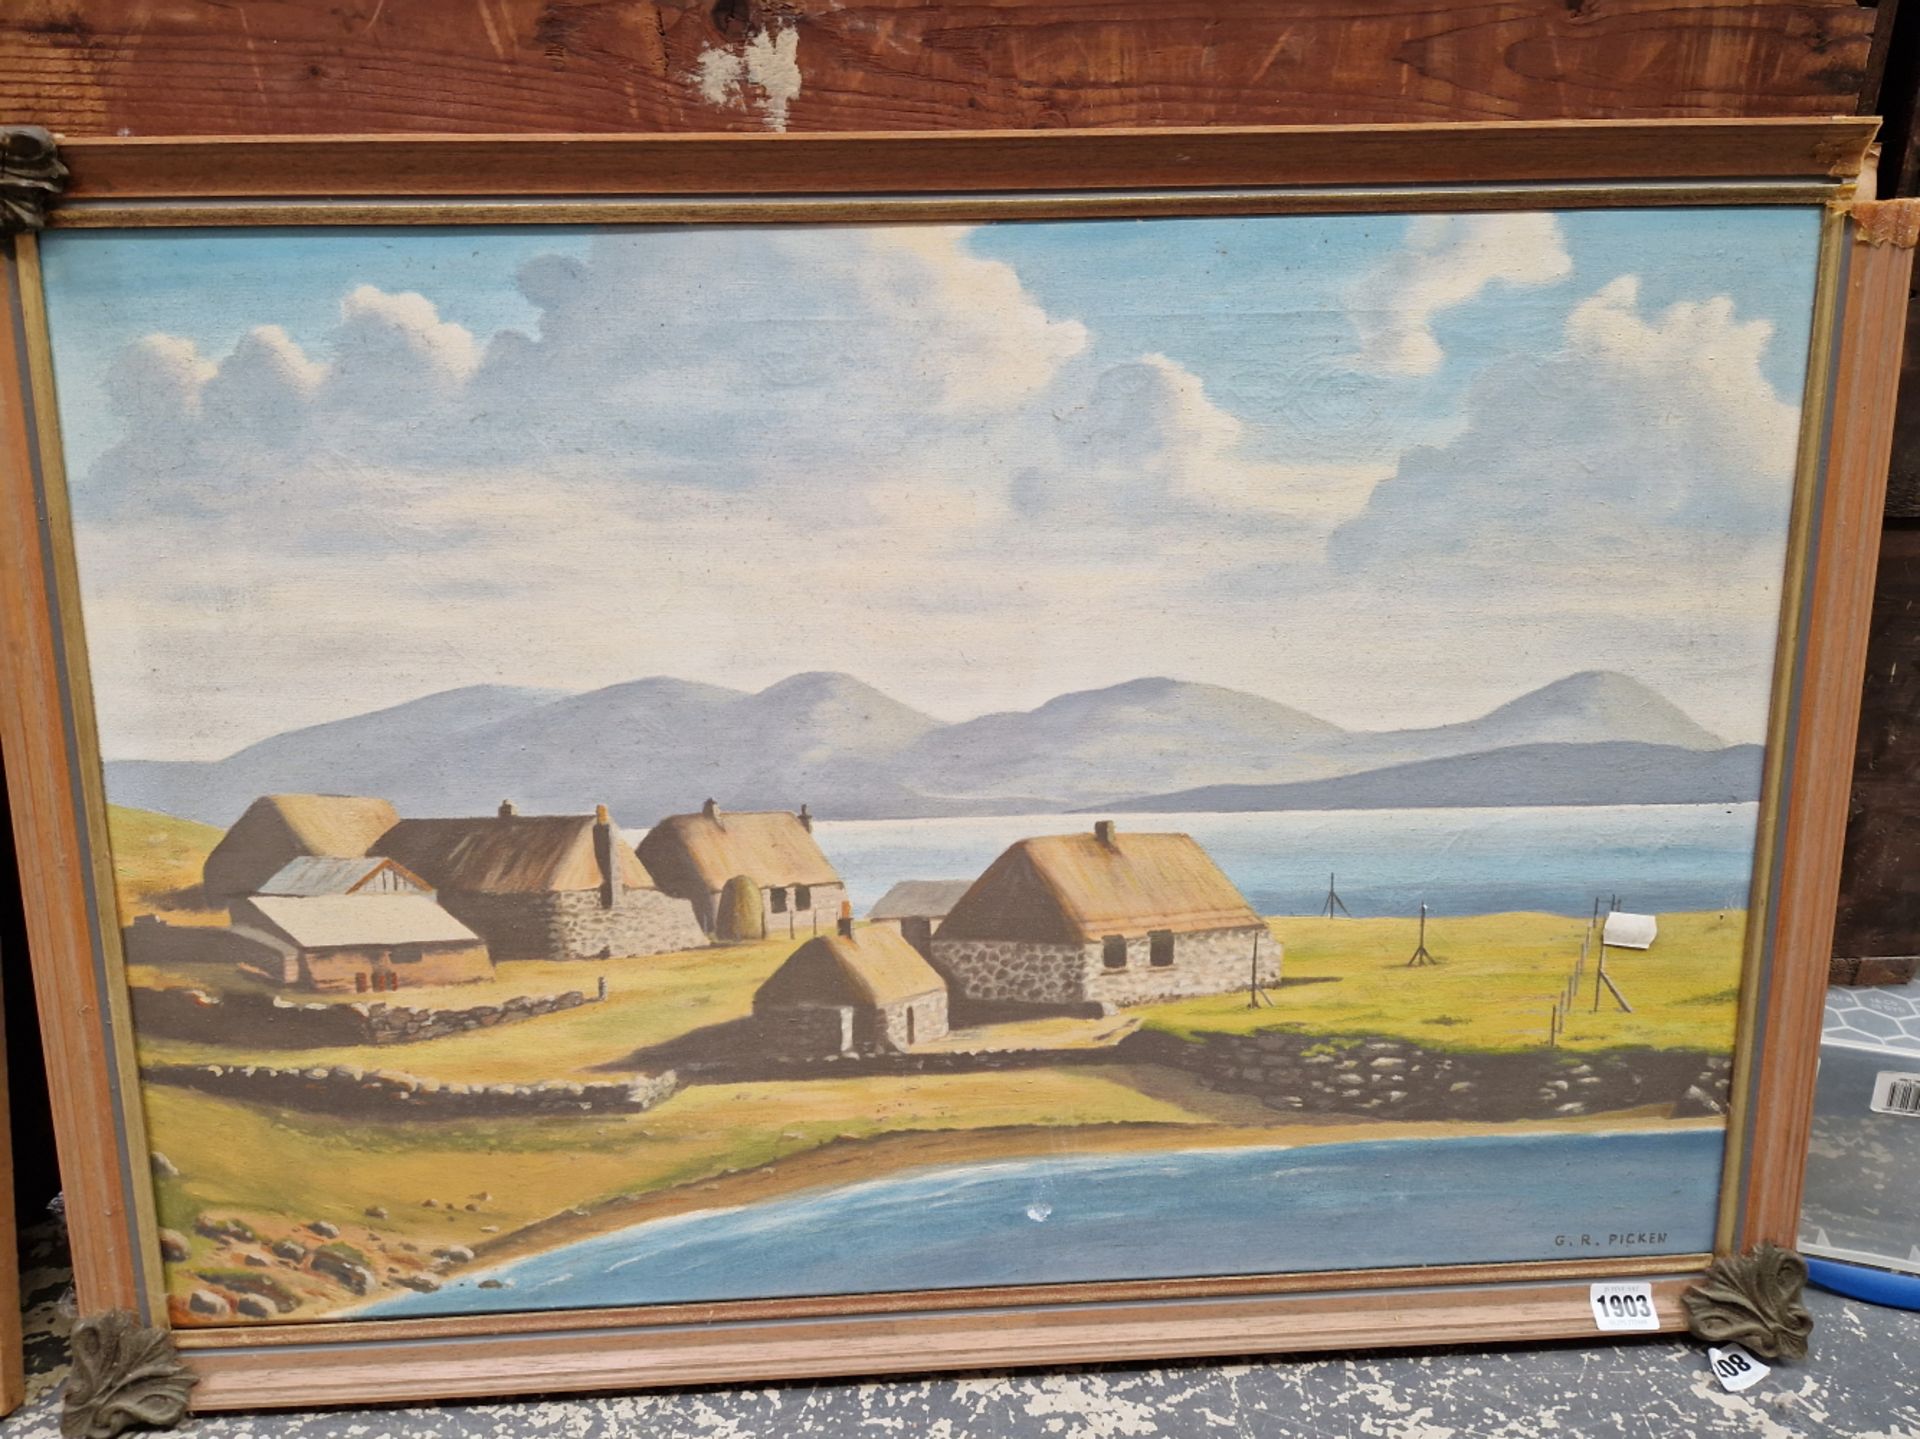 G. R. PICKEN 20th CENTURY SCHOOL. ARR. CROFTERS COTTAGES, SIGNED, OIL ON CANVAS. 50 x 75cms - Image 2 of 7